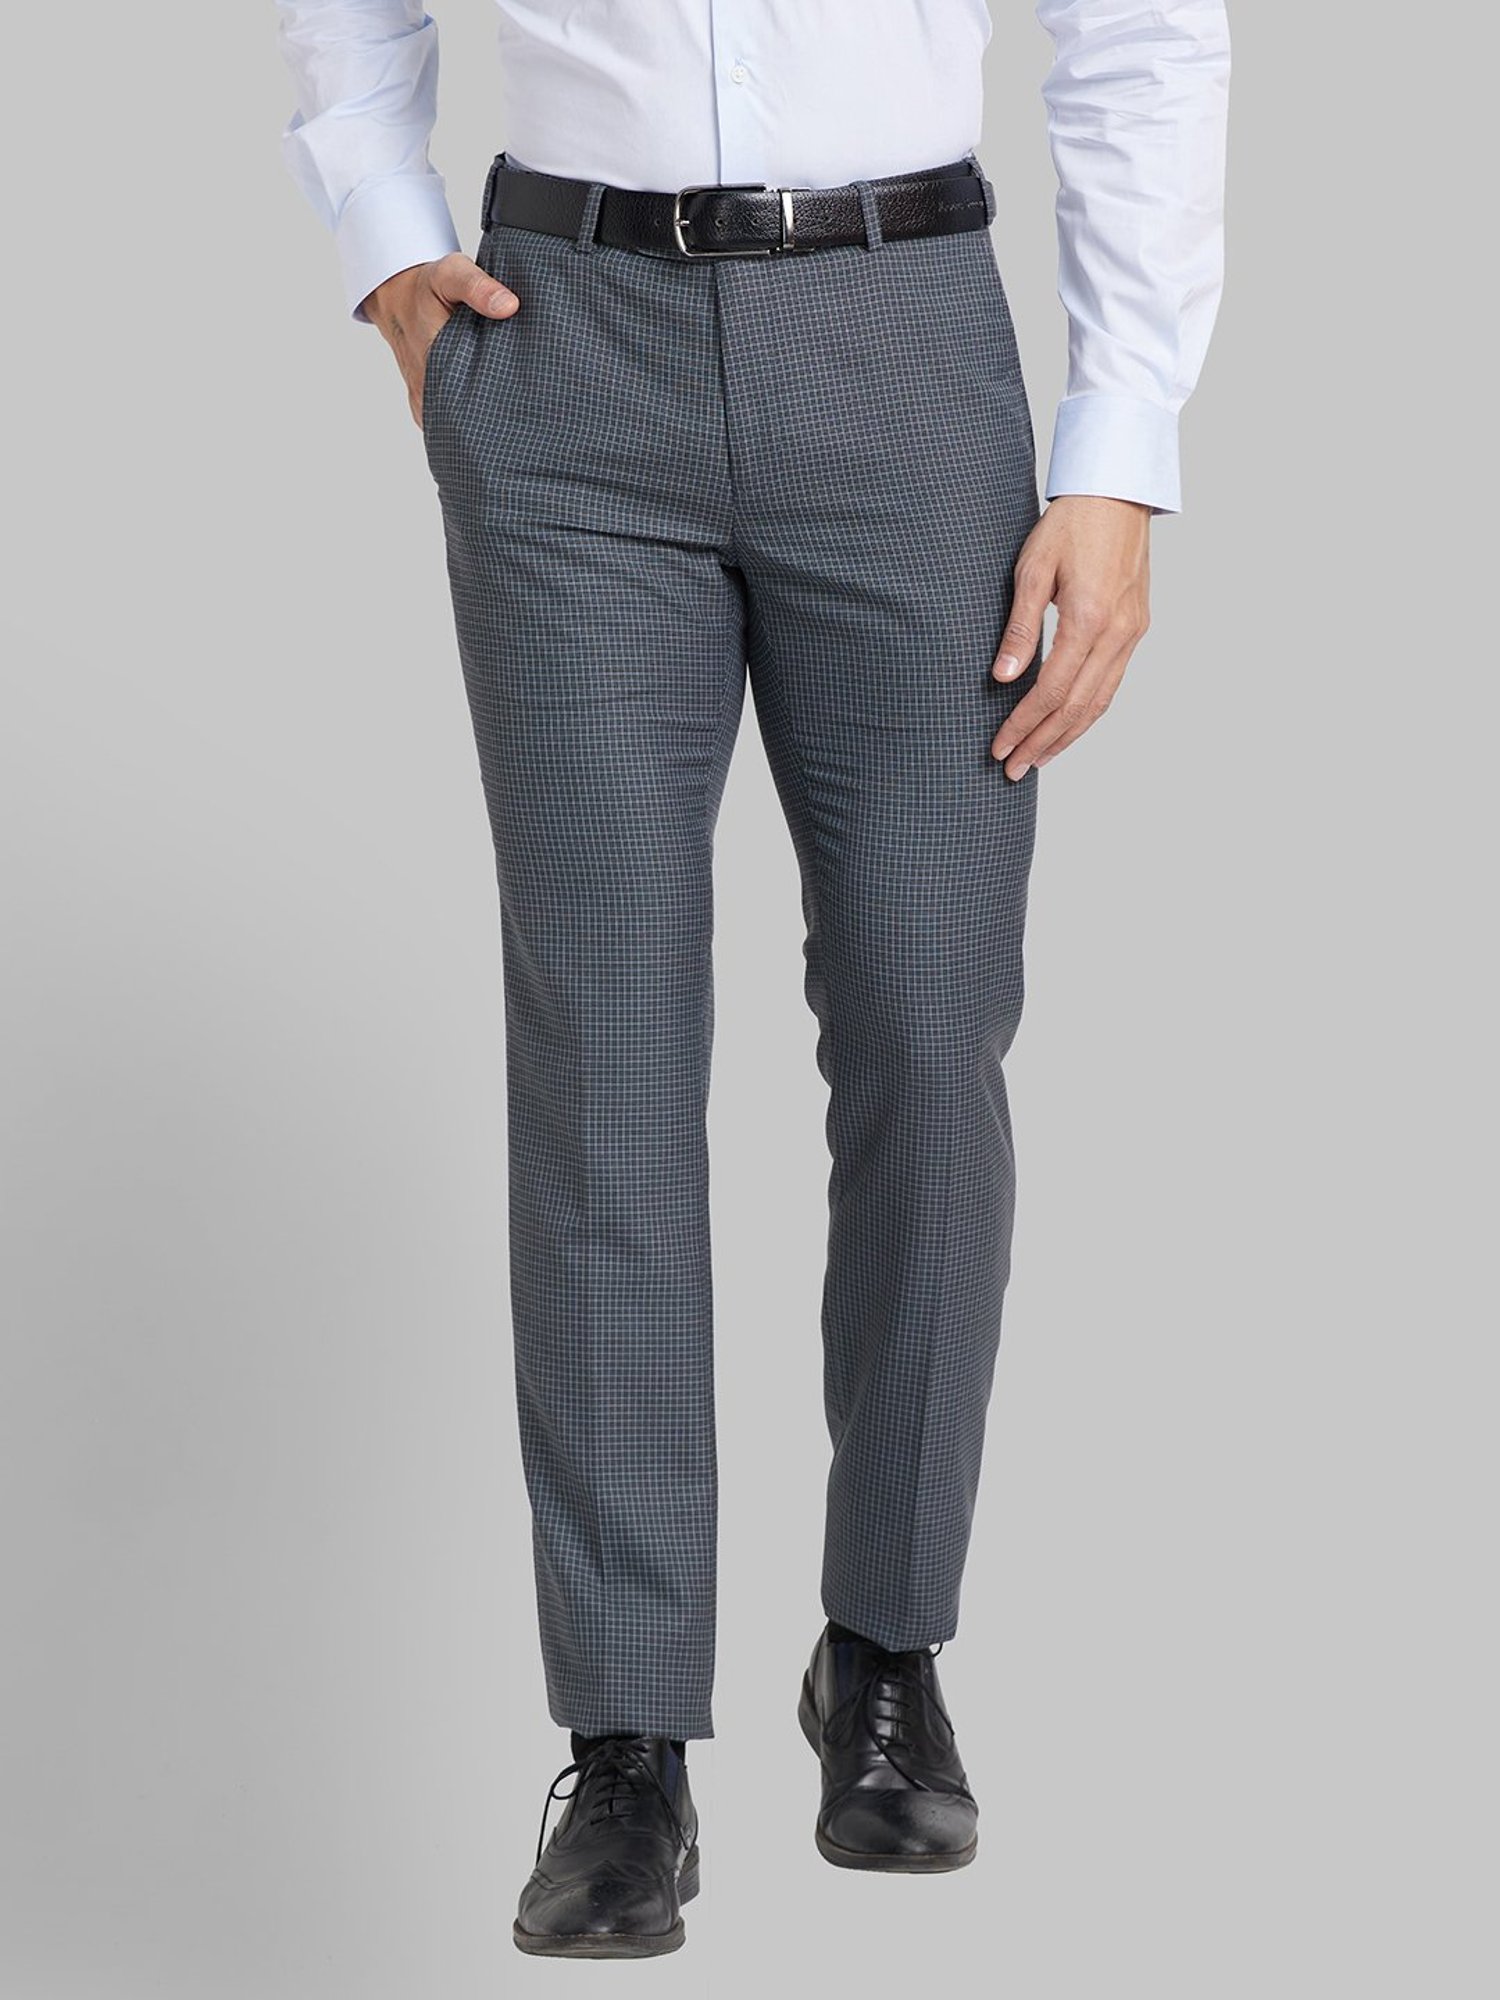 Tailored Grey Check Tweed Trousers | Buy Online at Moss